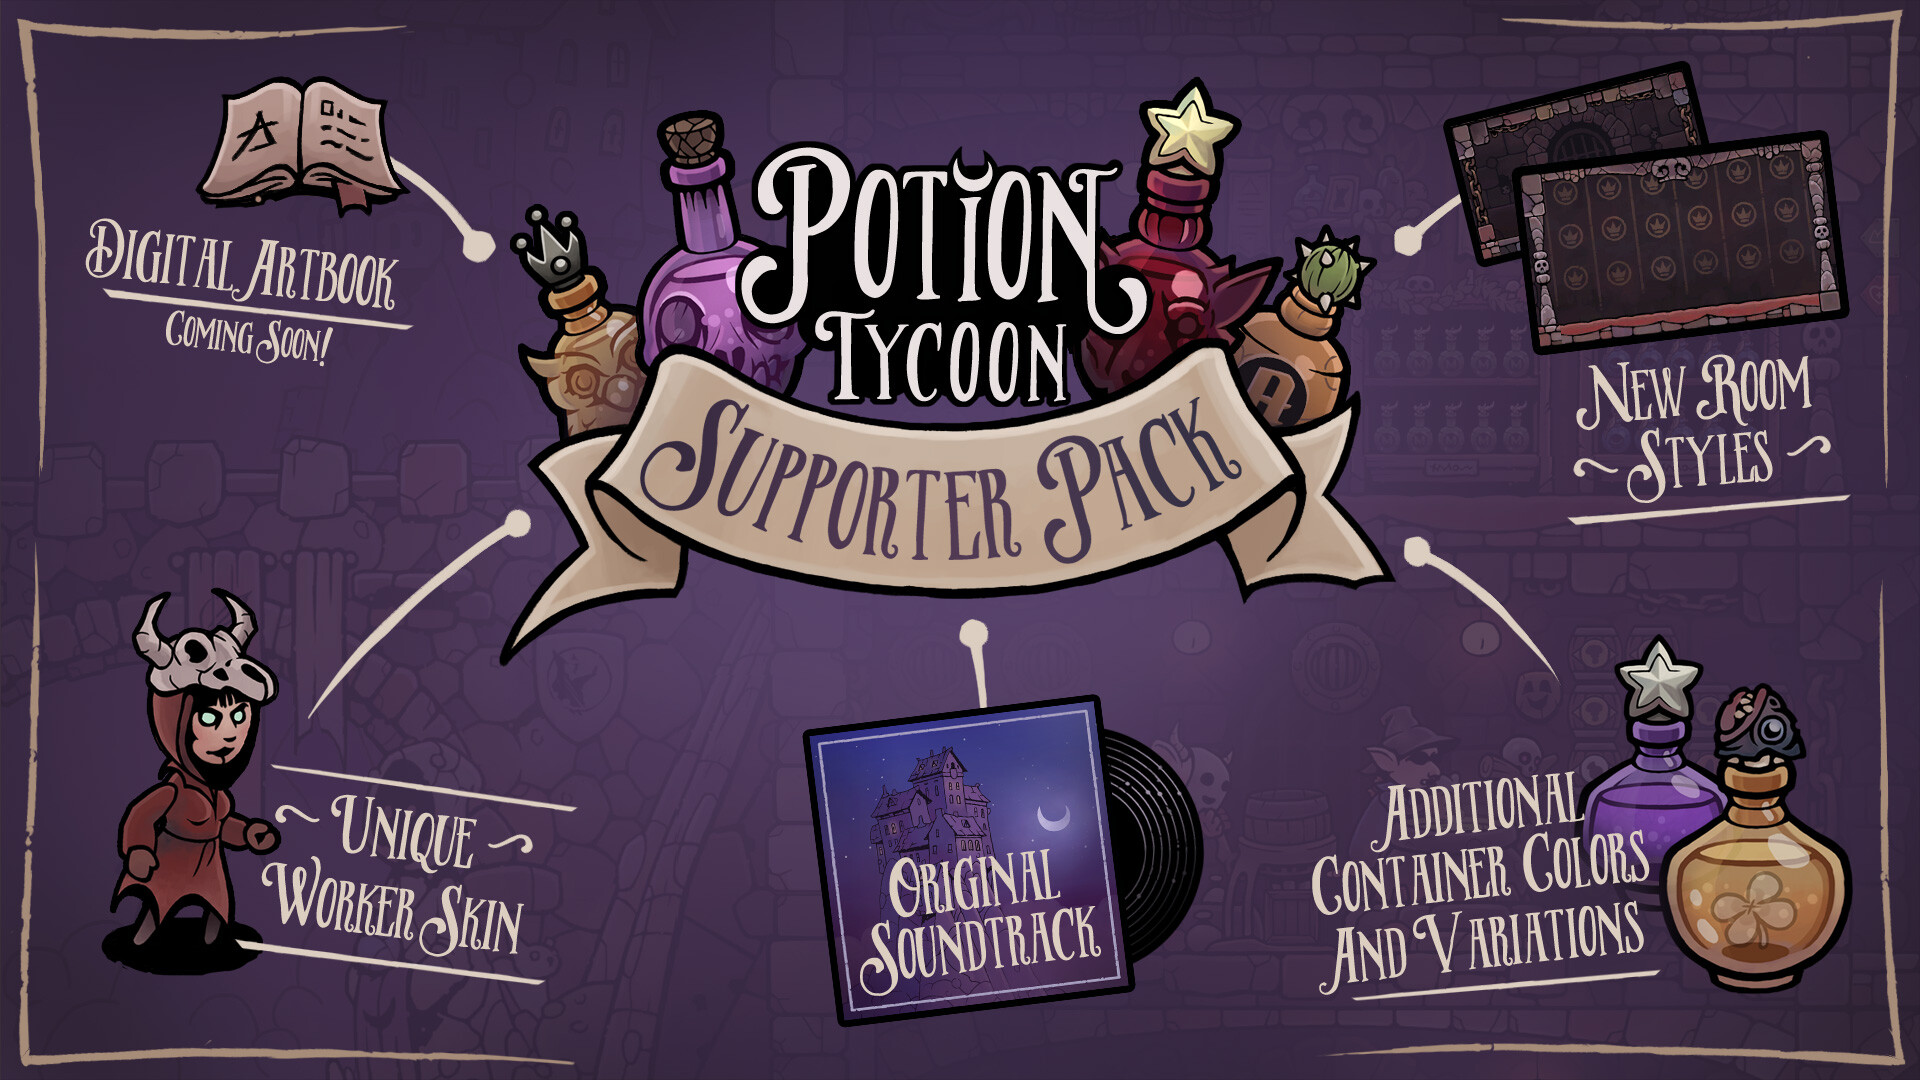 Potion Tycoon - Supporter Pack DLC Steam CD Key 7.88 $